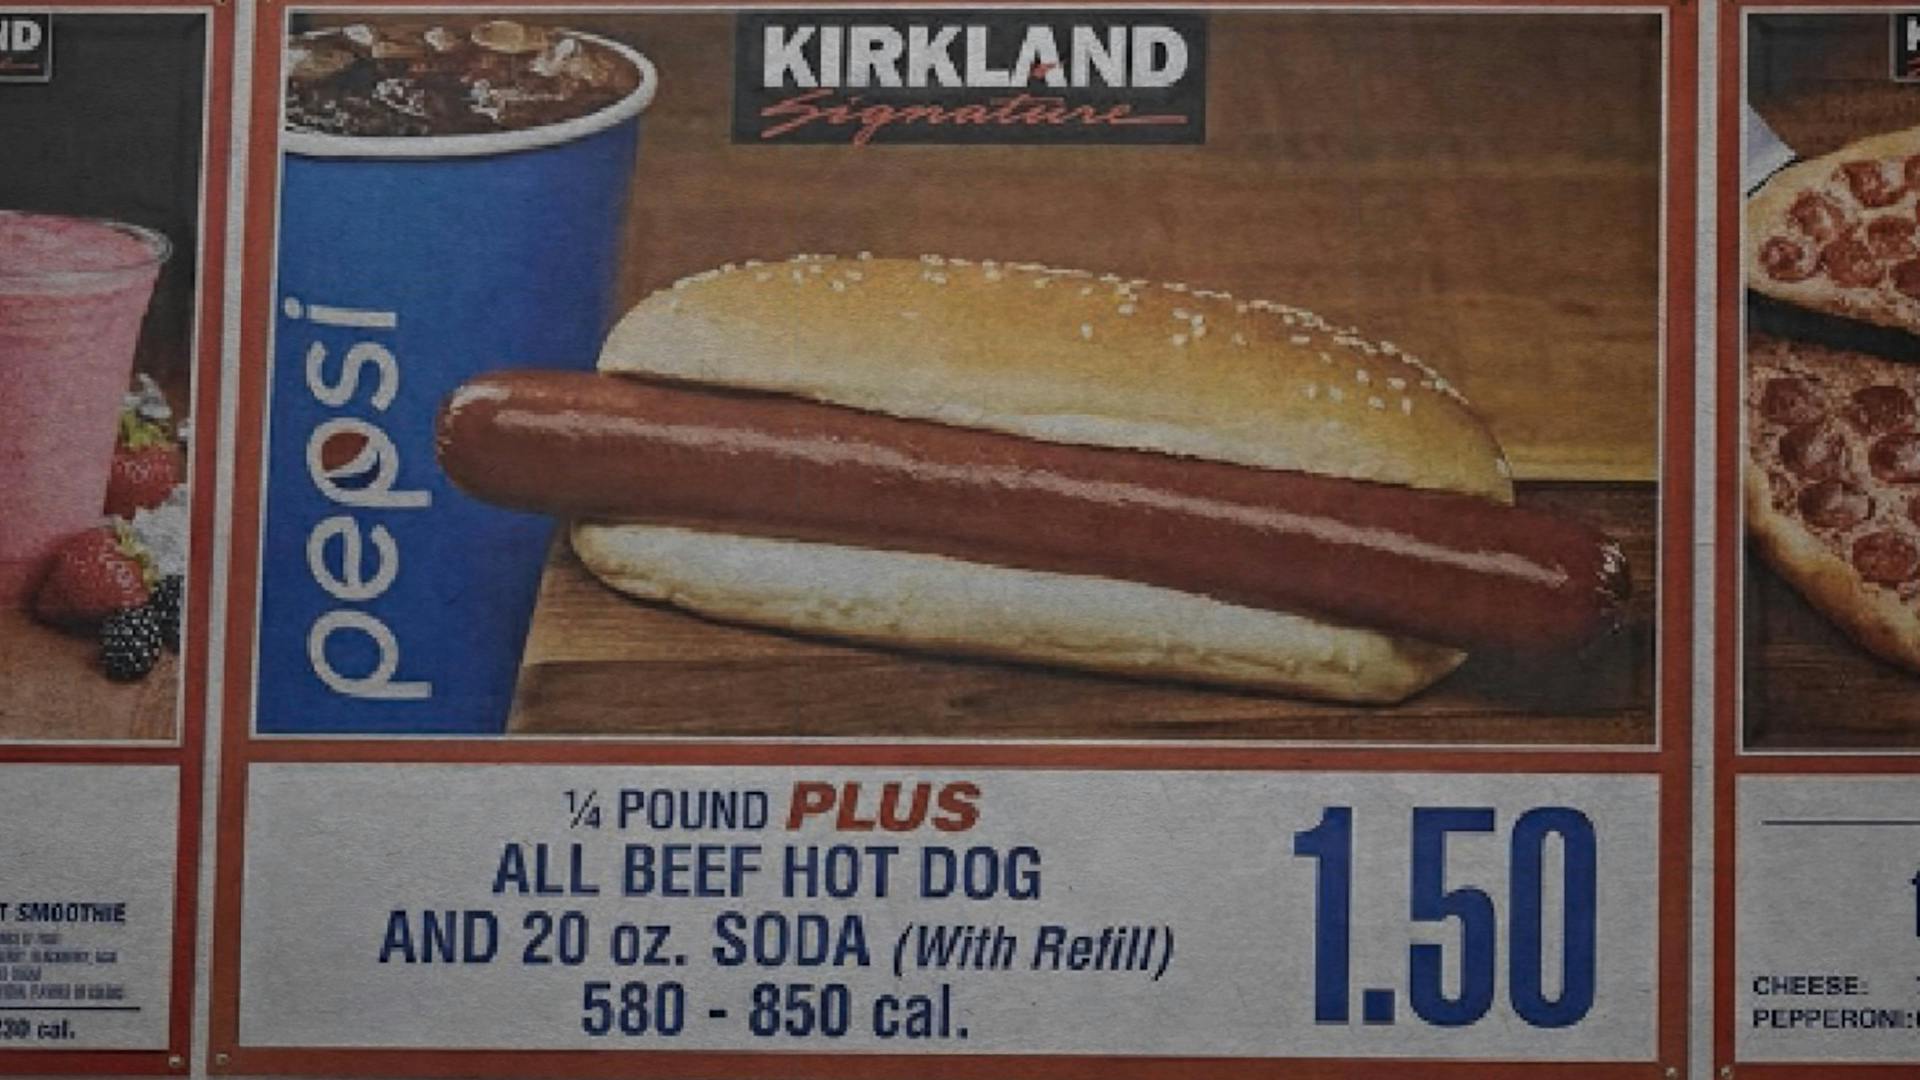 Hot Dog and Drink for $1.50